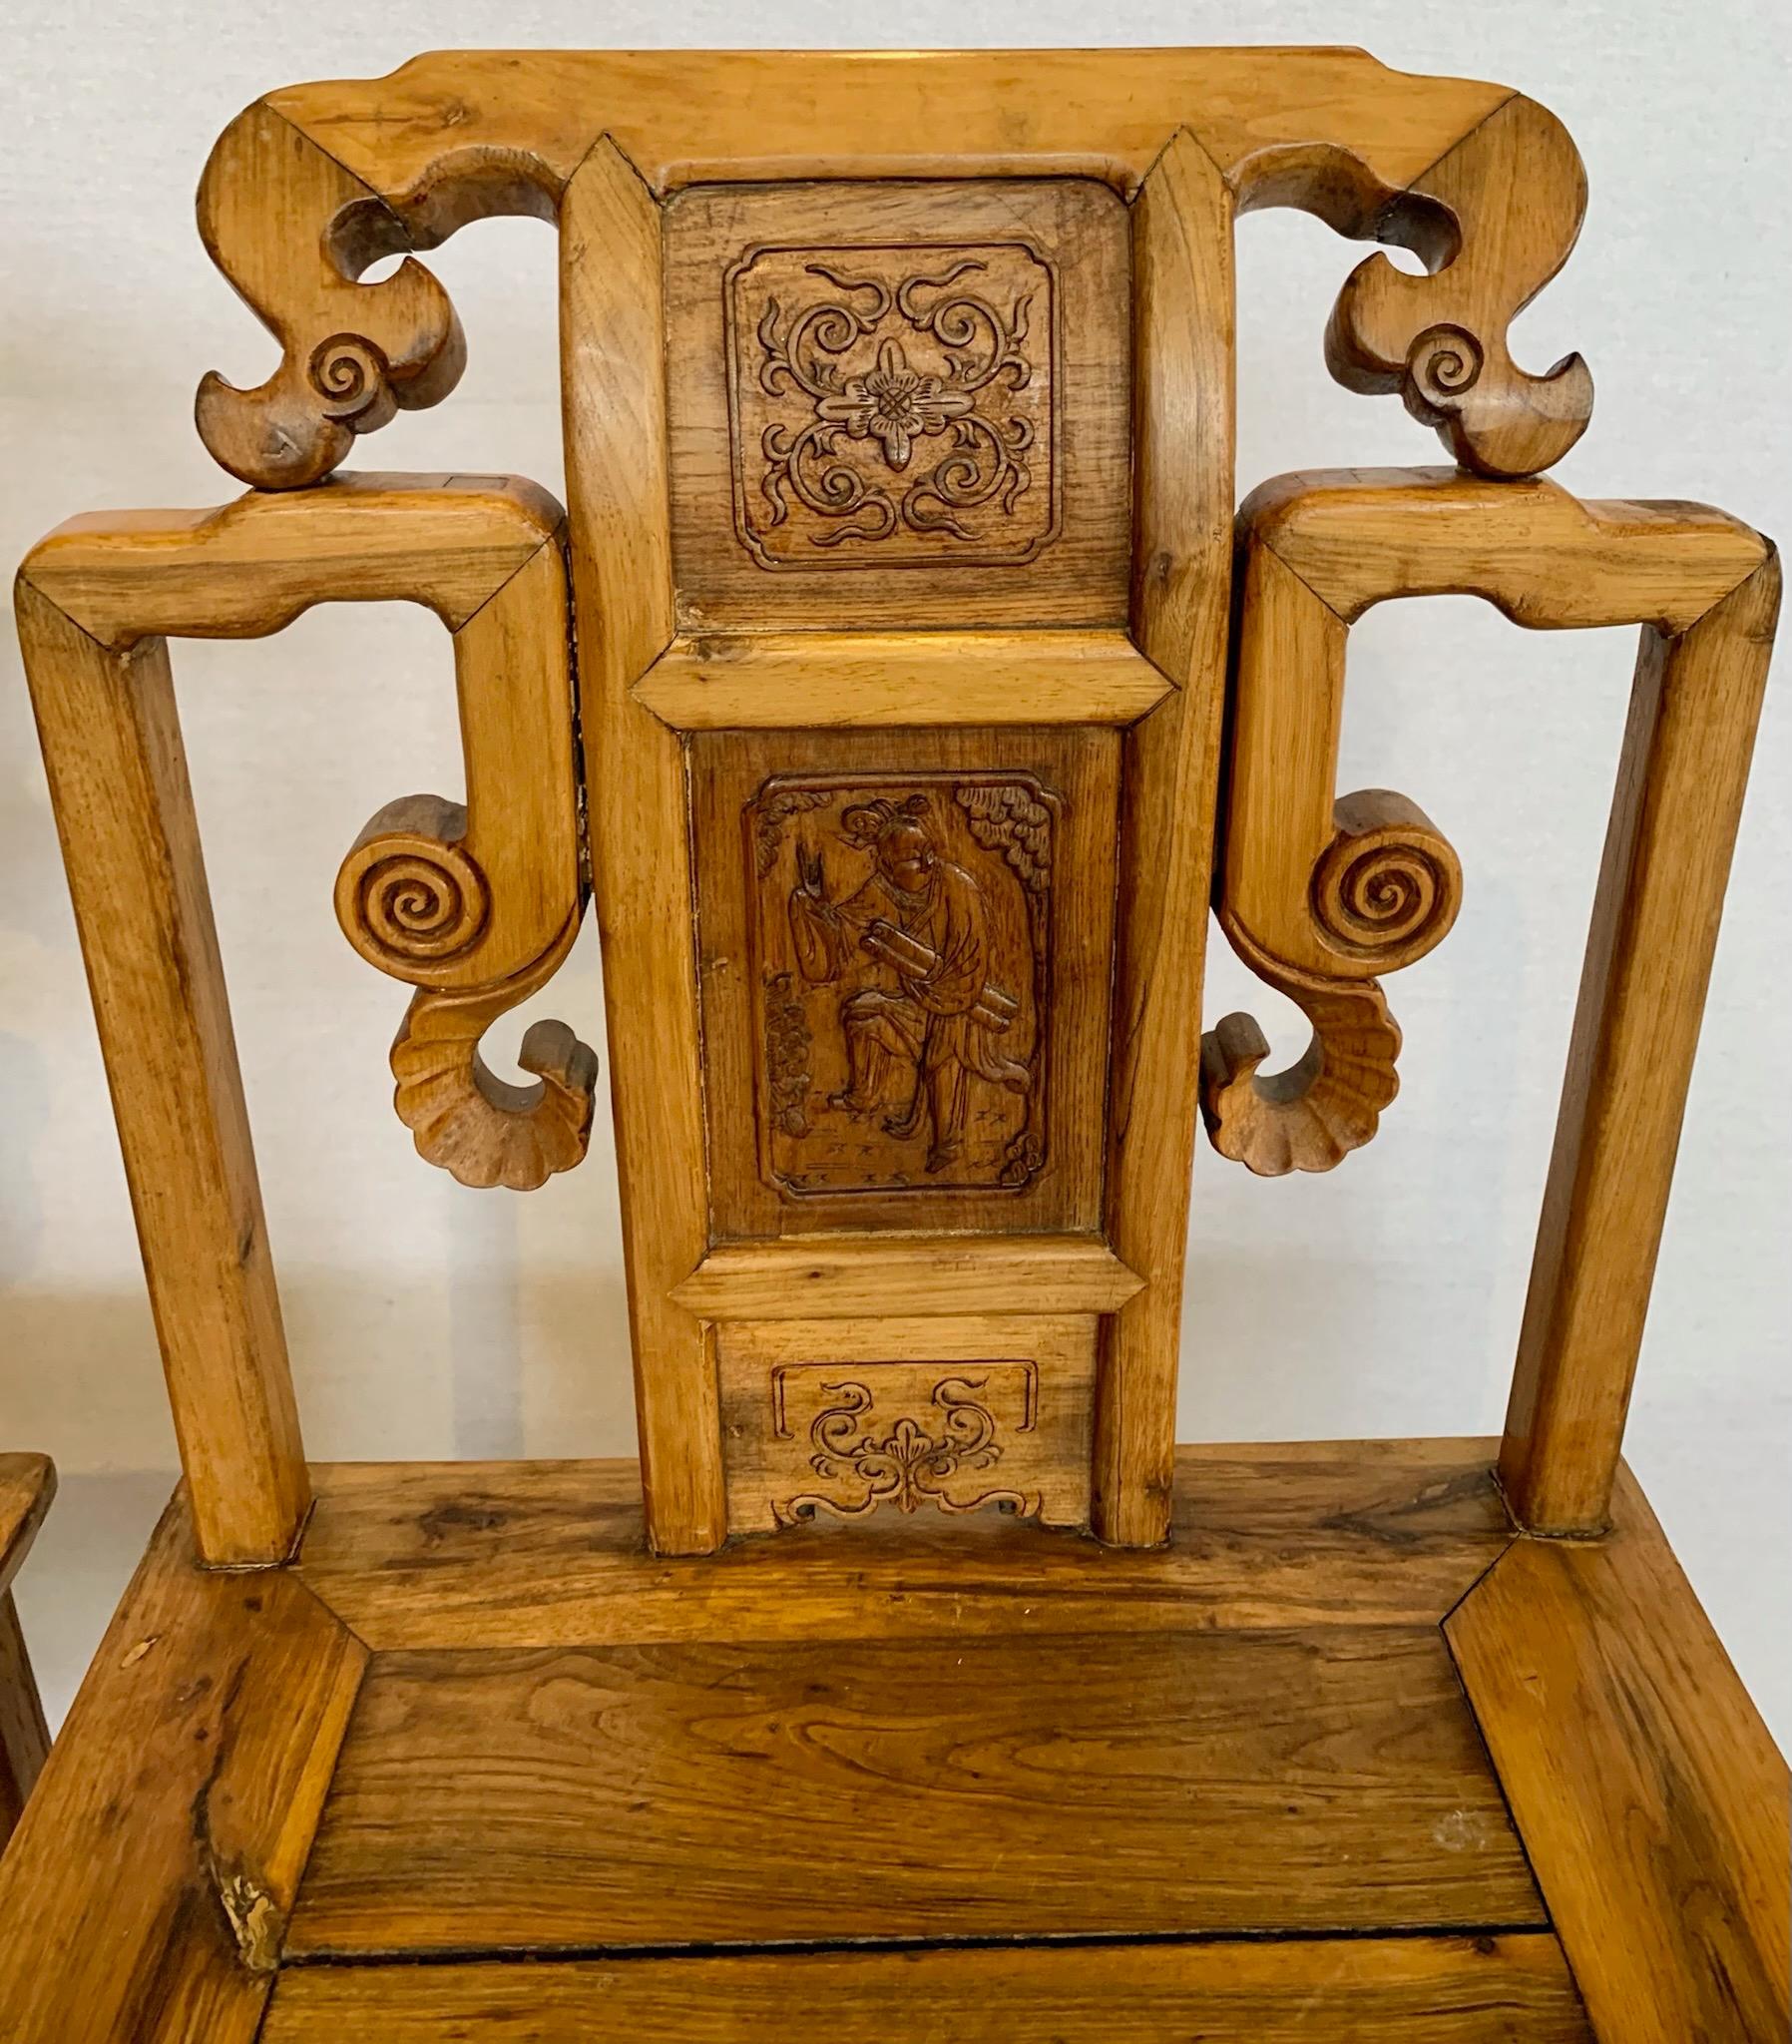 Near pair of antique Chinese side chairs with hand carved scrolled details with the back splat depicting Chinese scholars. Supported on square legs joined by stretchers.